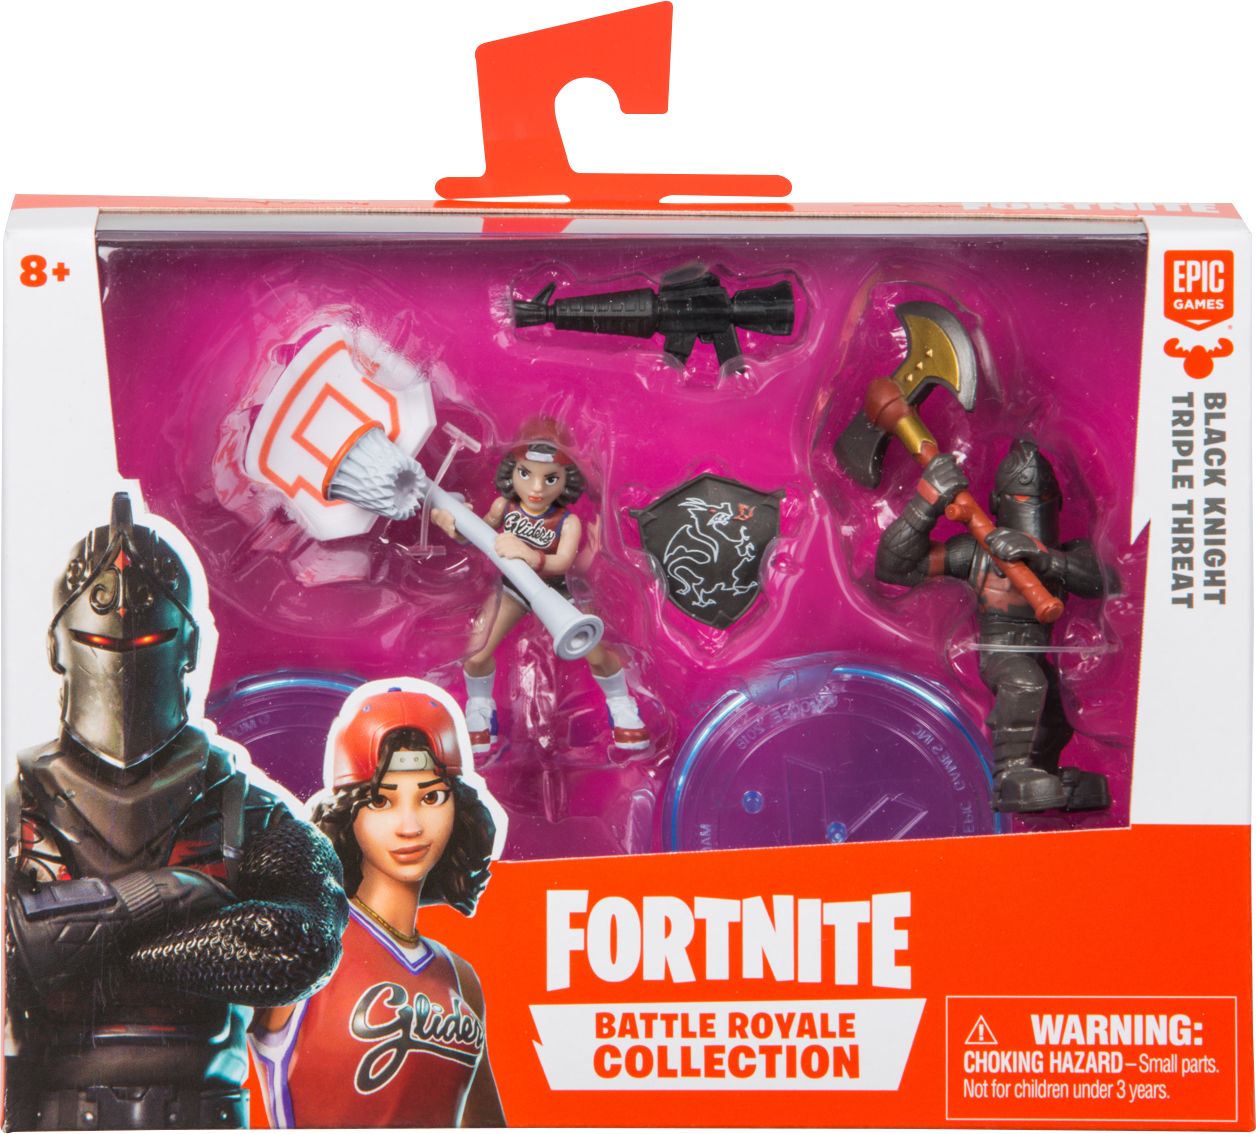 Fortnite Battle Royale Collection Duo Pack Styles May Vary 63514 - fortnite battle royale collection duo pack styles may vary 6!   3514 best buy